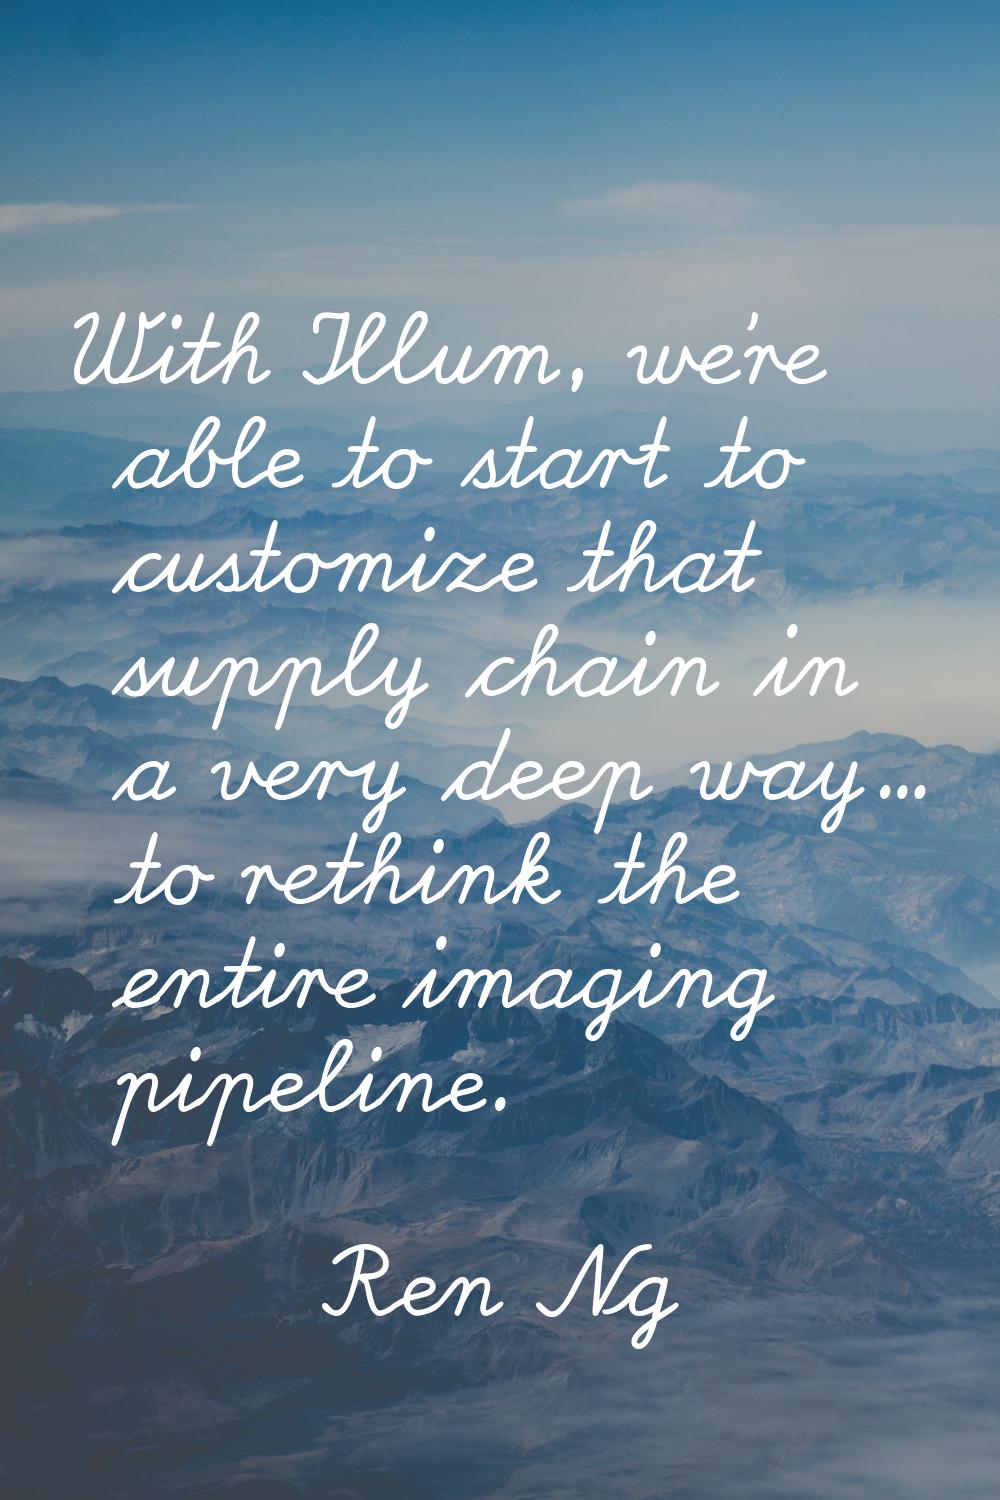 With Illum, we're able to start to customize that supply chain in a very deep way... to rethink the